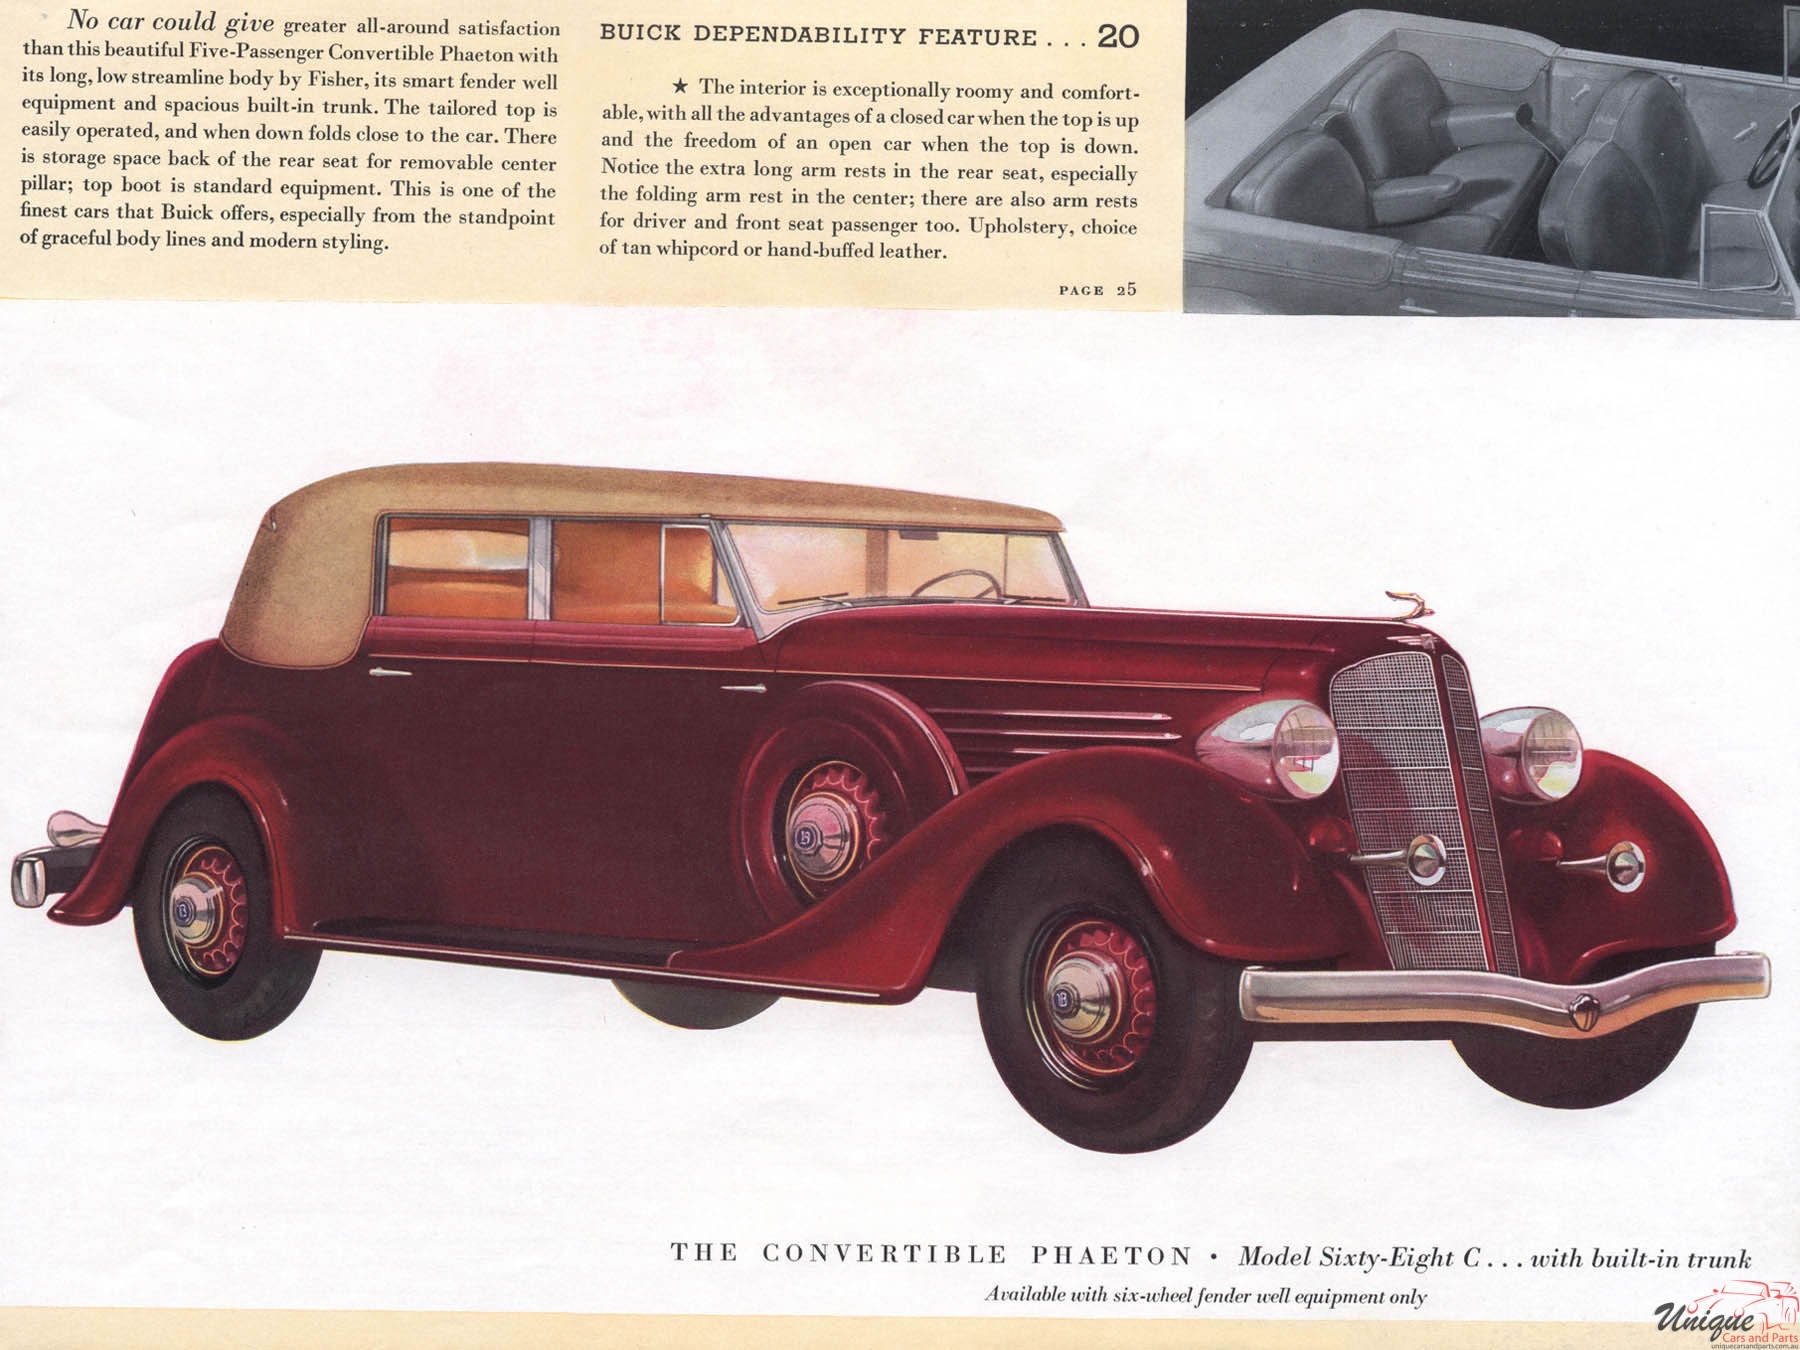 1935 Buick Brochure Page 23